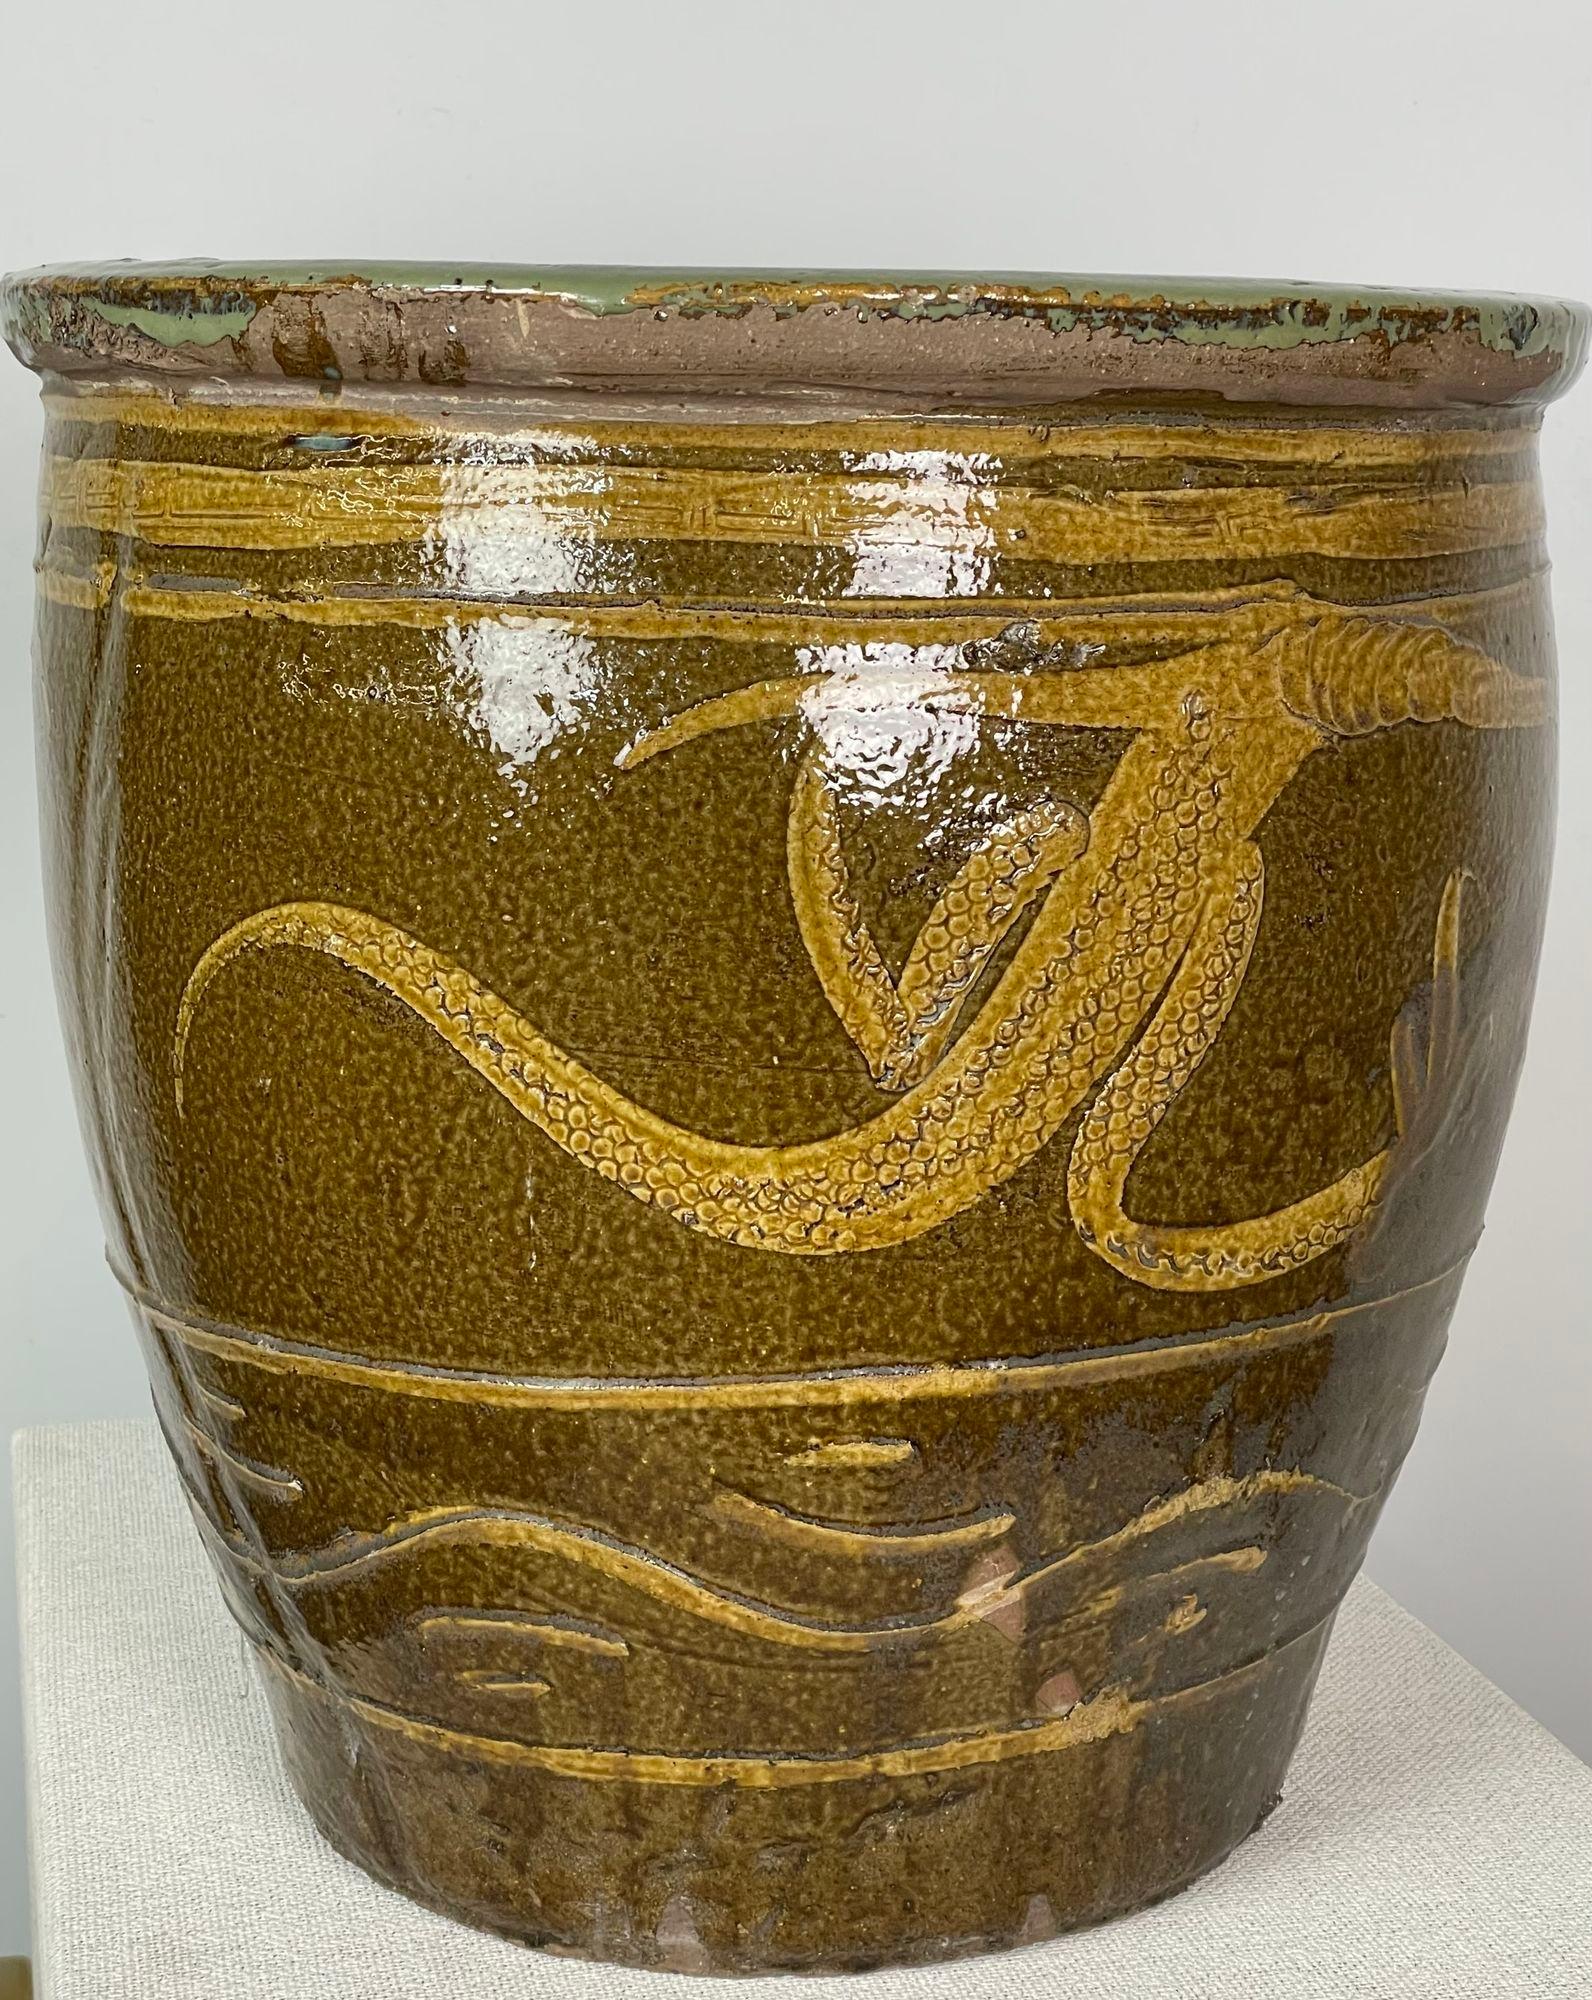 Asian Jardinière, Planter, Cachepot or Fish Bowl, Tony Duquette 
A finely crafted Cachepot or Fish Bowl in the manner of Tony Duquette having double Dragons in a pleasing Silhouette. This pot has a traditional continuous coiling dragon wrapped